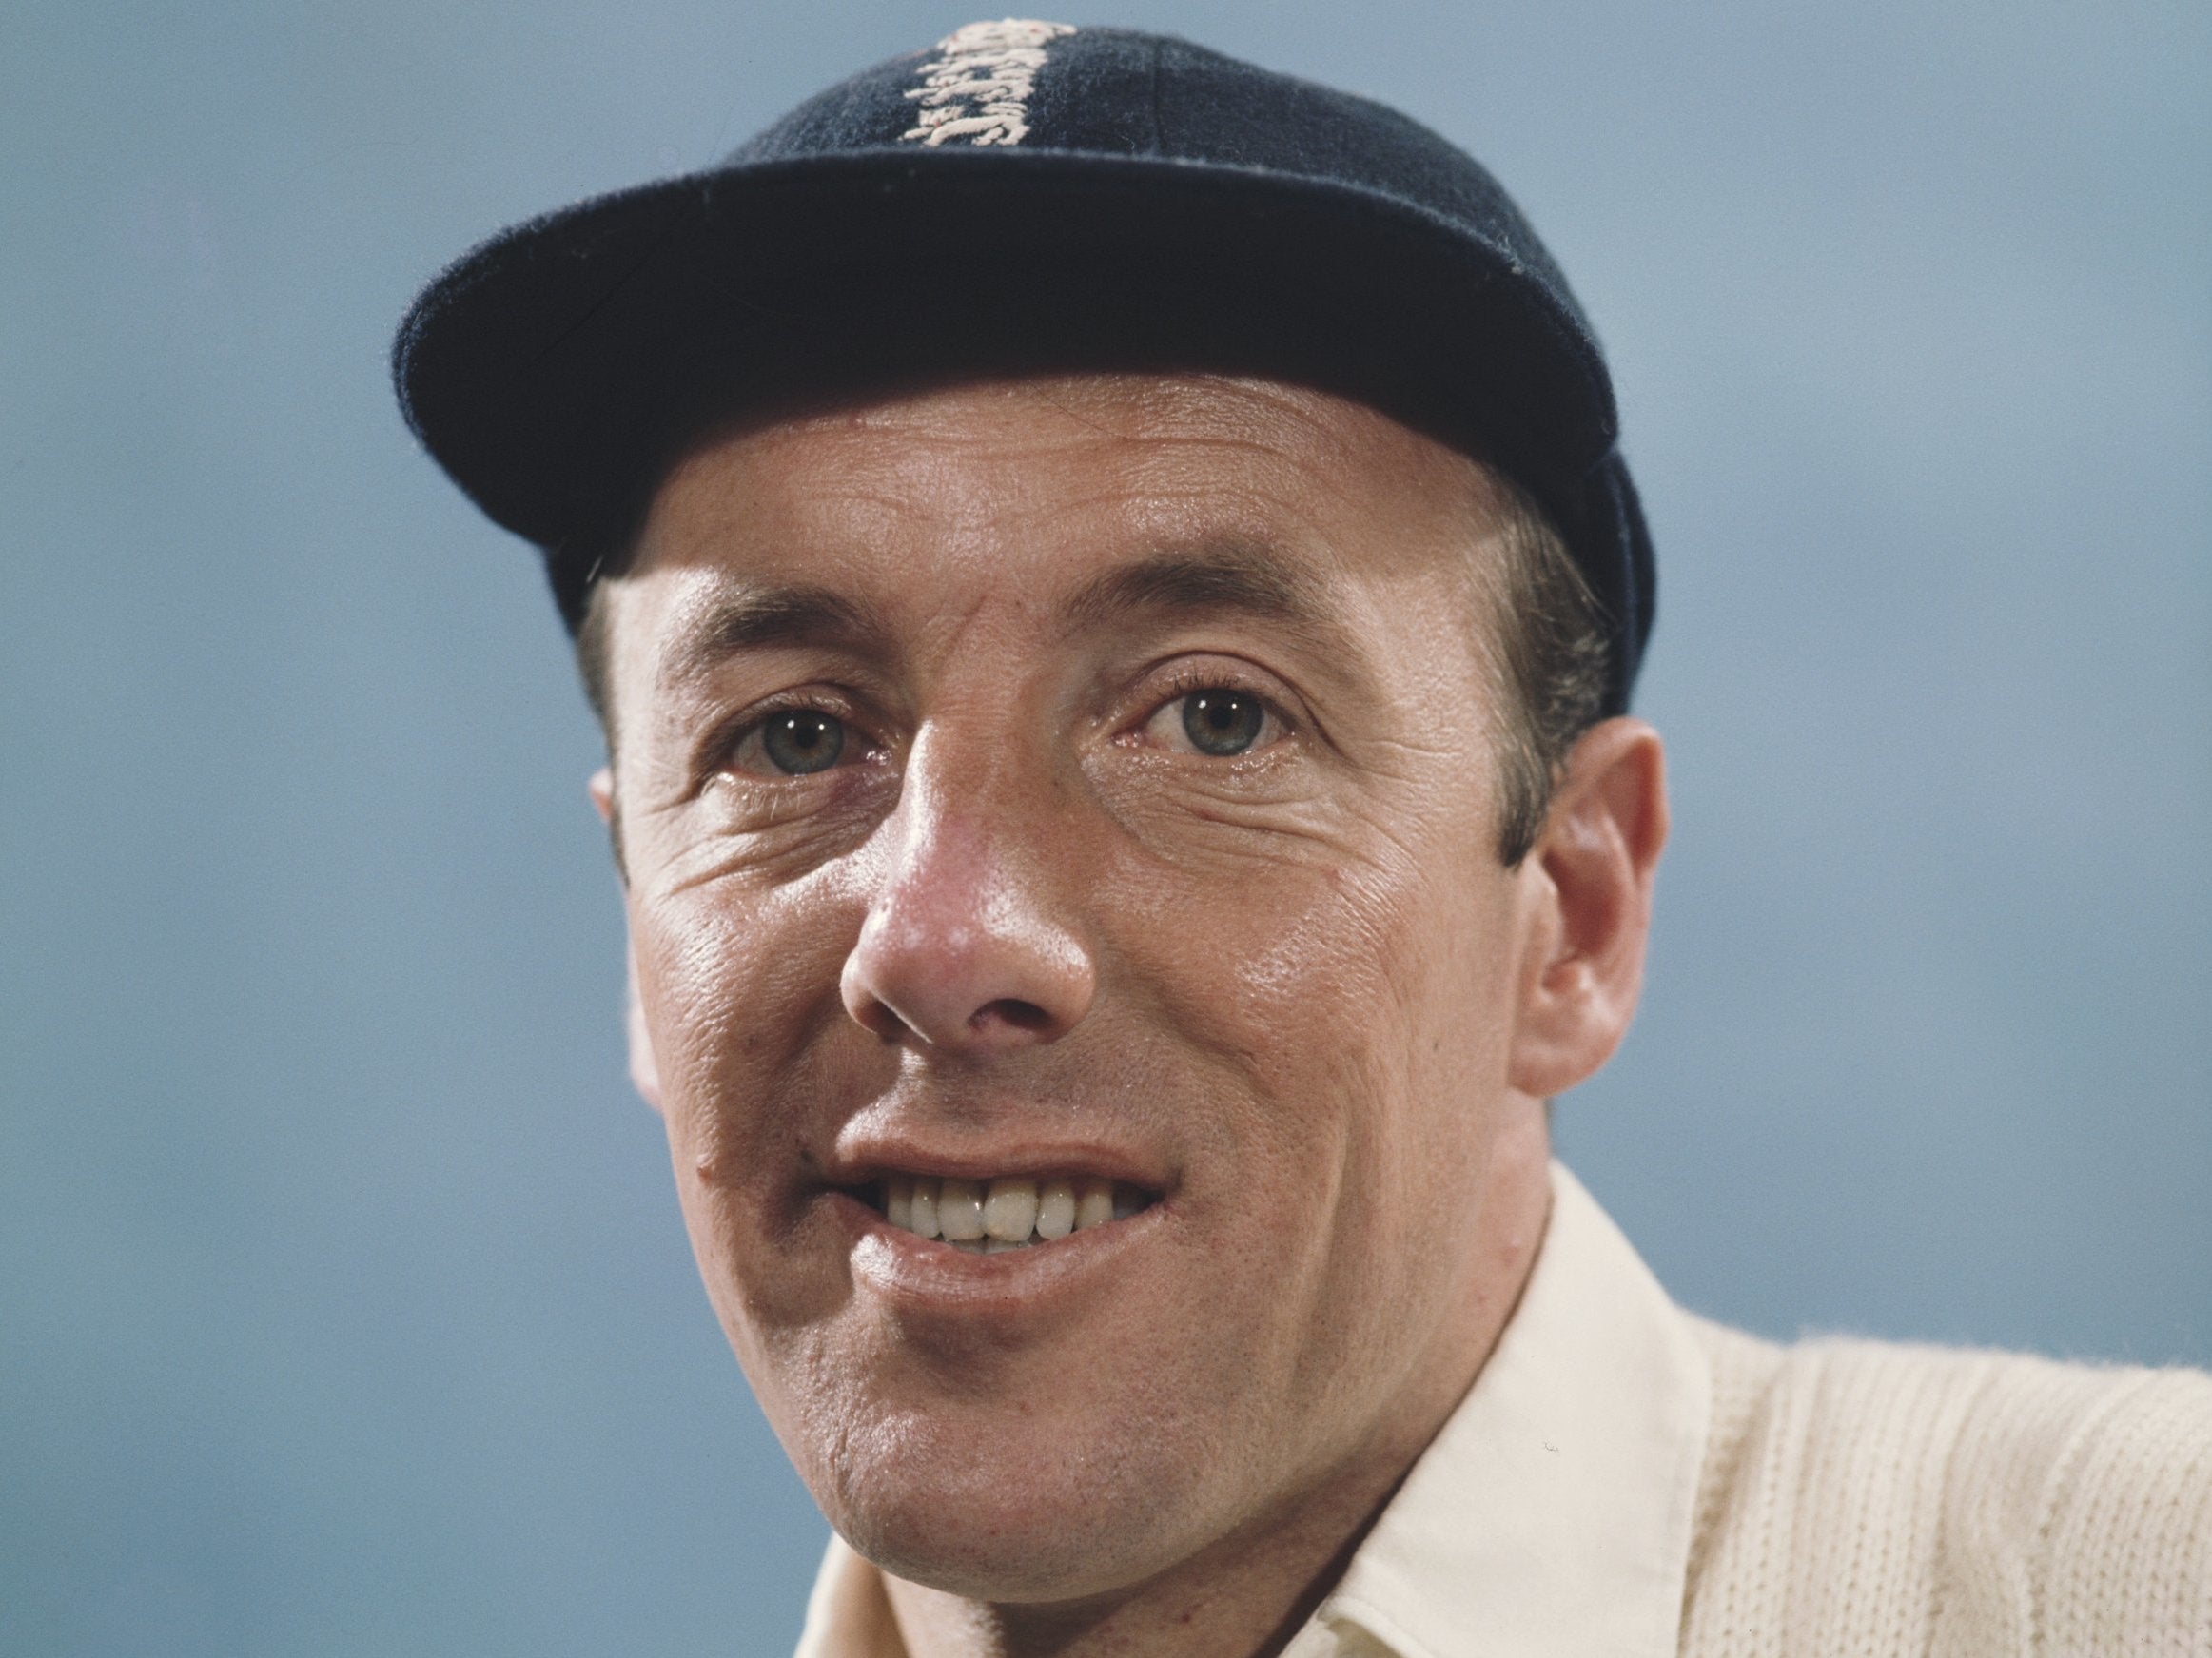 Murray also received 22 caps for England and was one of ‘Wisden’s’ Cricketers of the Year in 1967